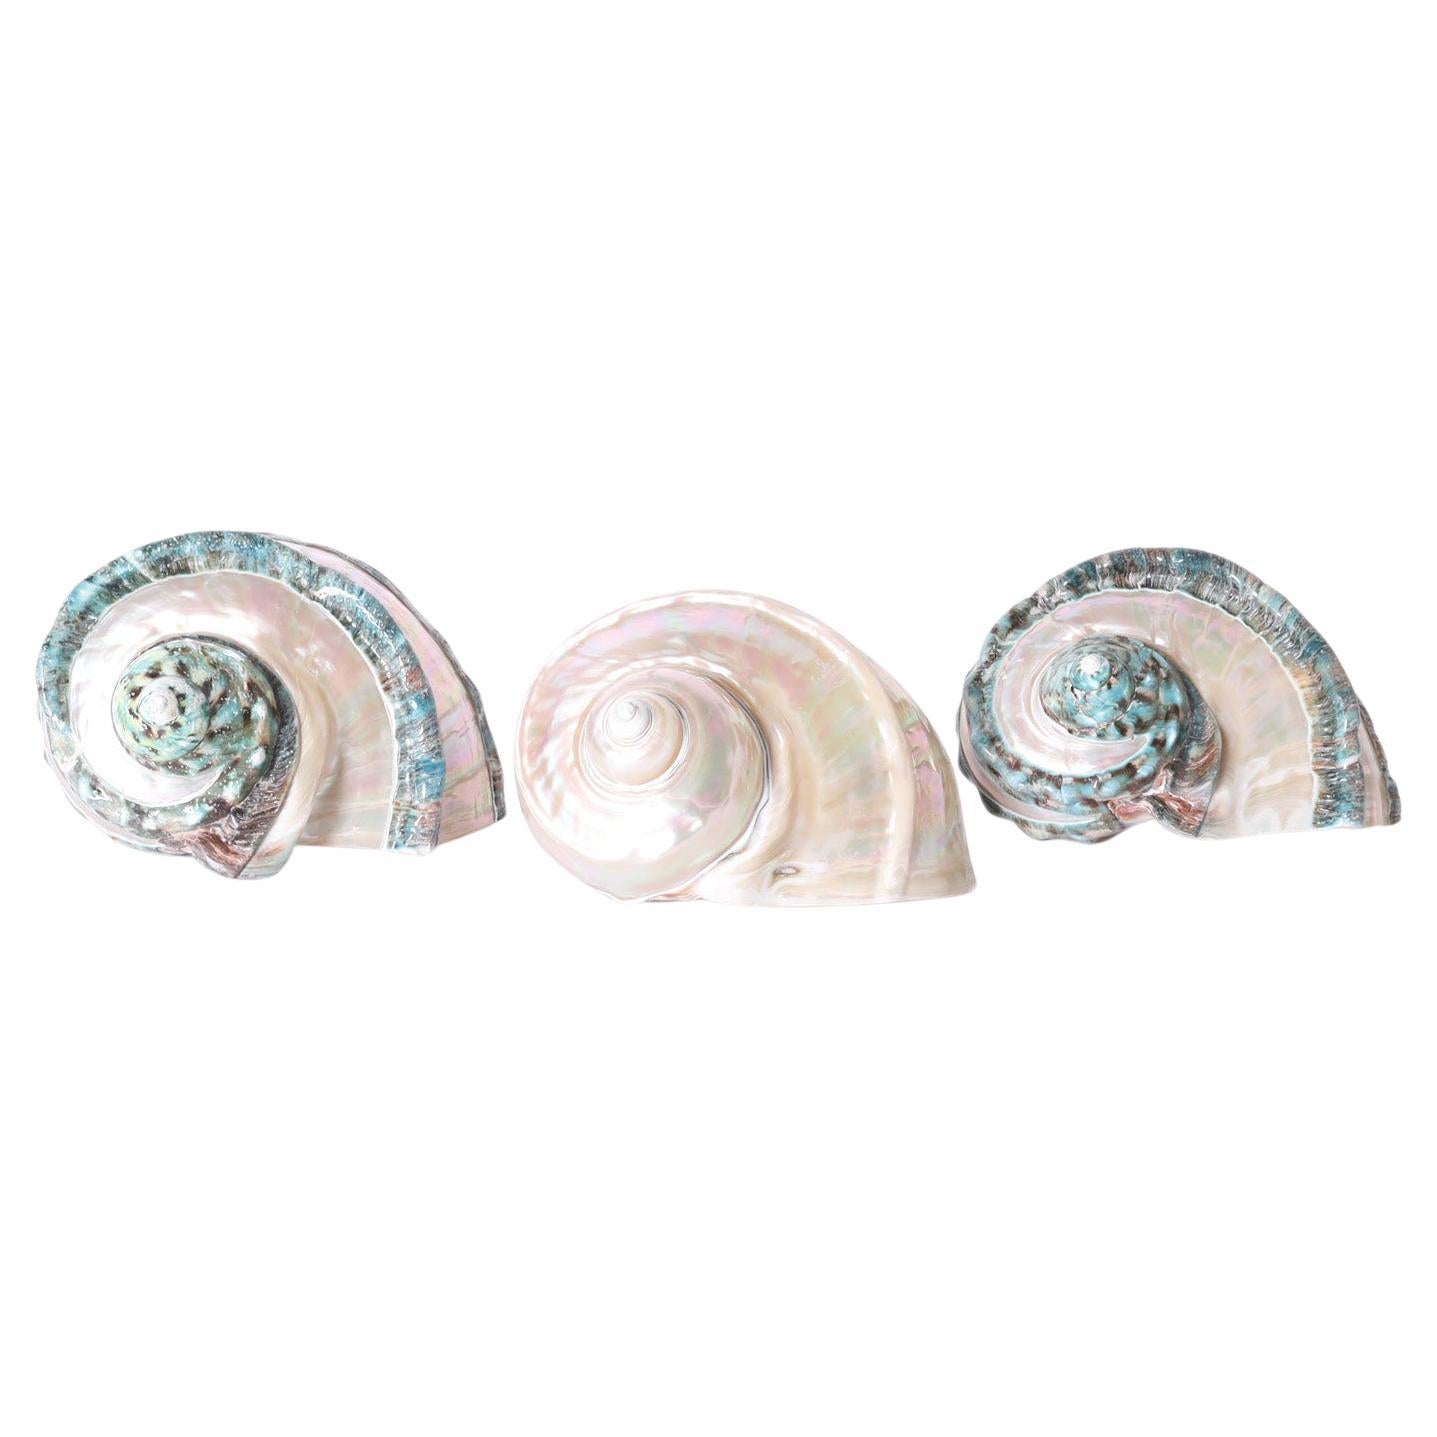 Giant Banded Turbo Shells, Priced Individually For Sale